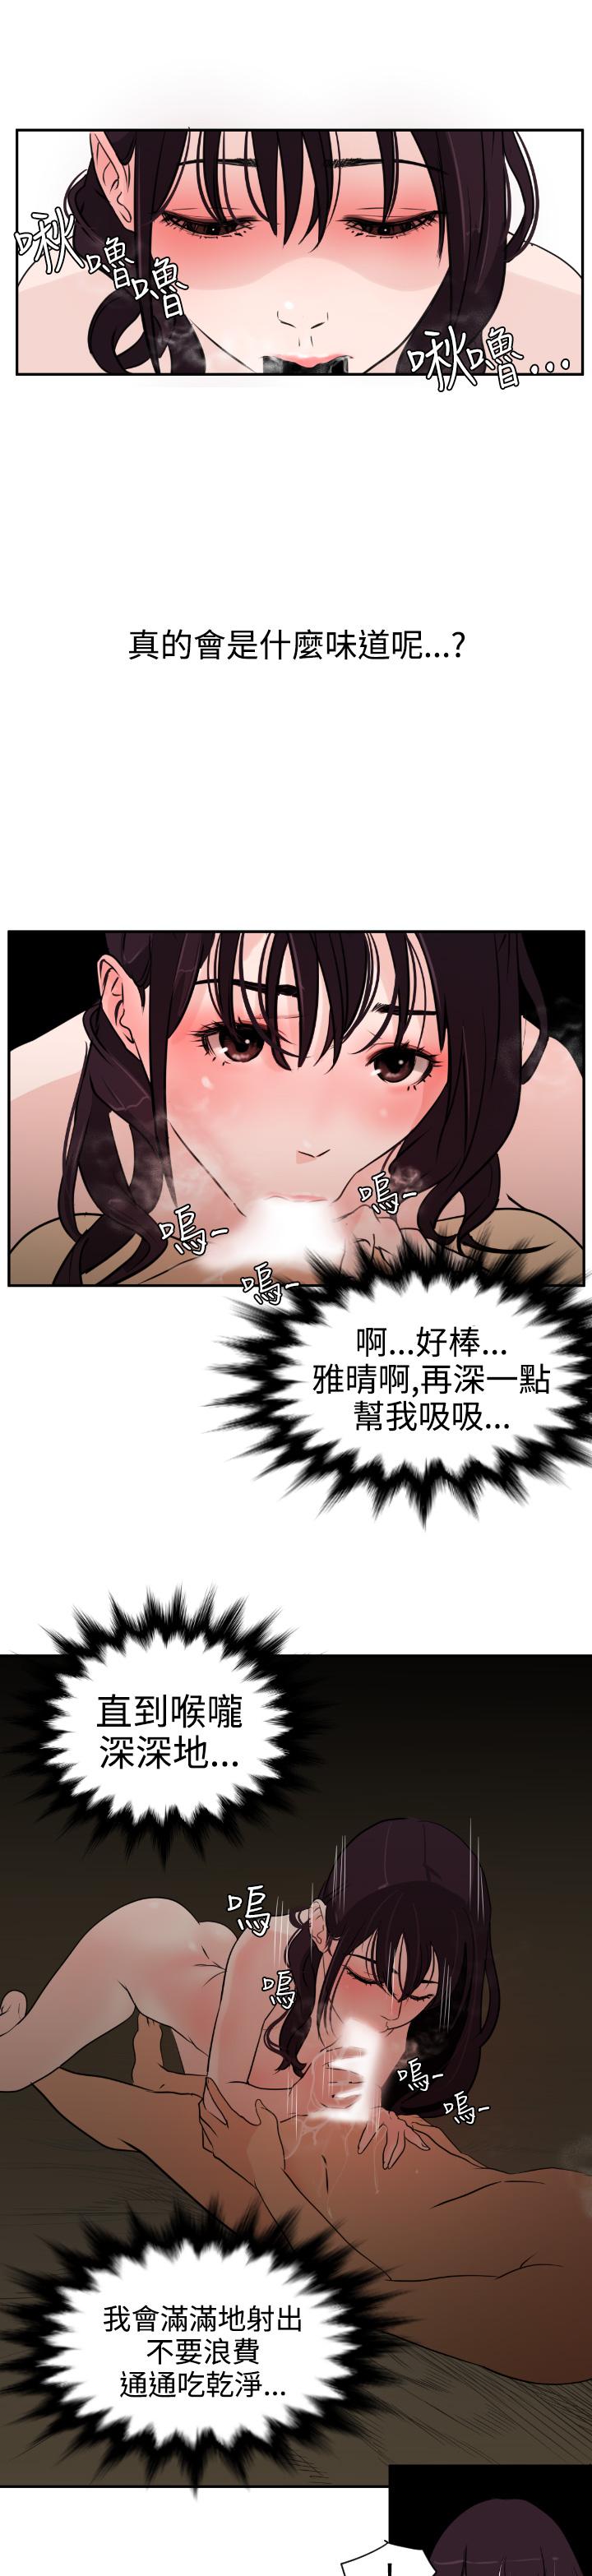 Desire King (慾求王) Ch.1-16 (chinese) 200